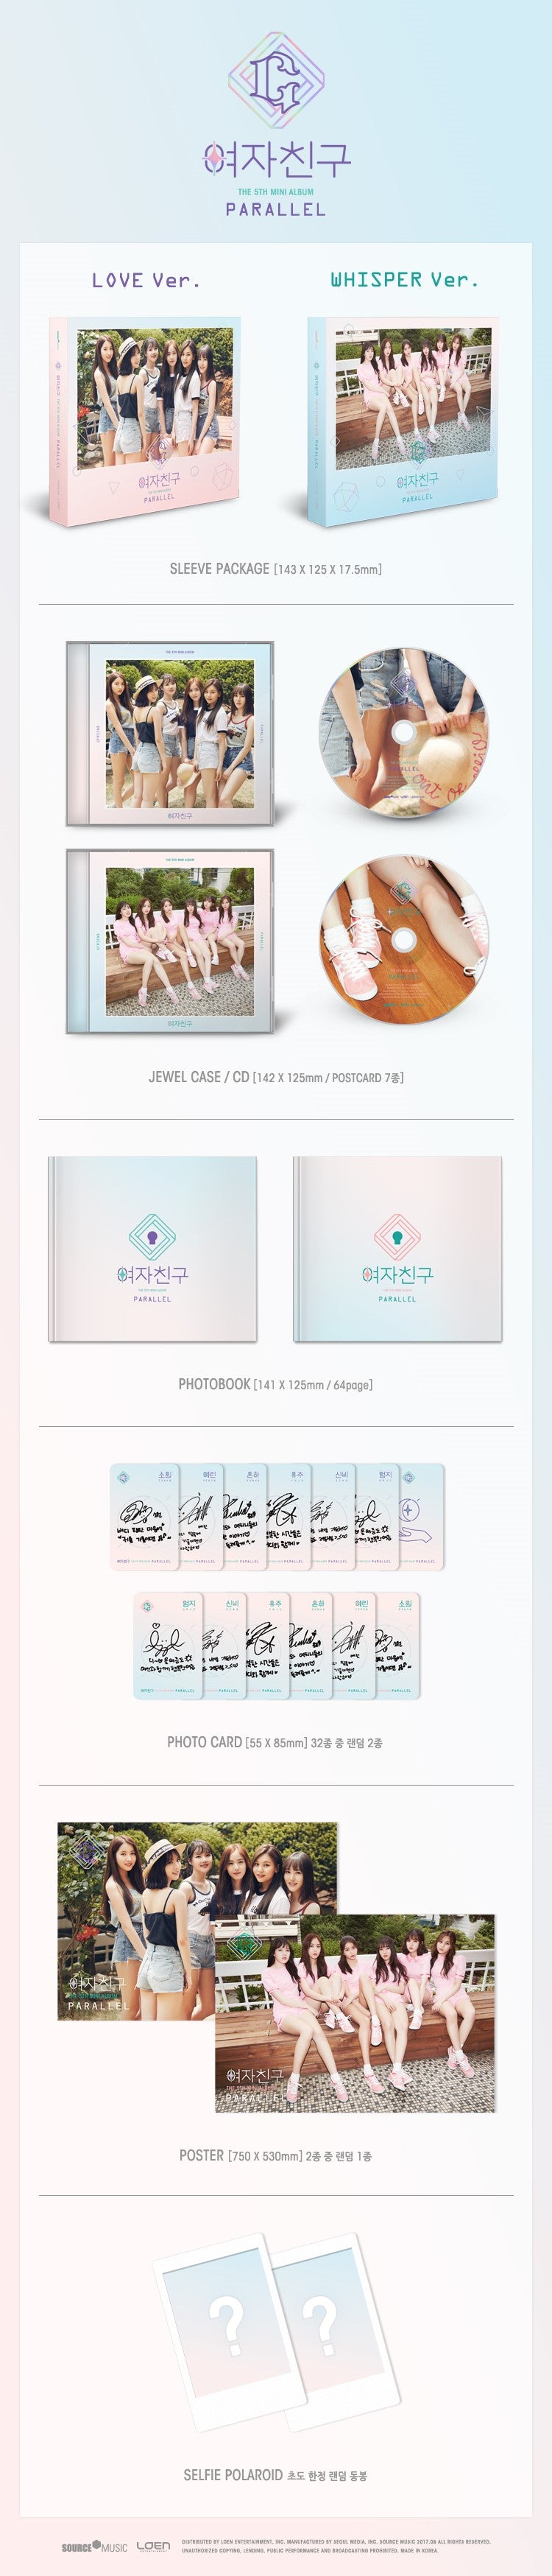 1 CD
1 Booklet
1 Photocards